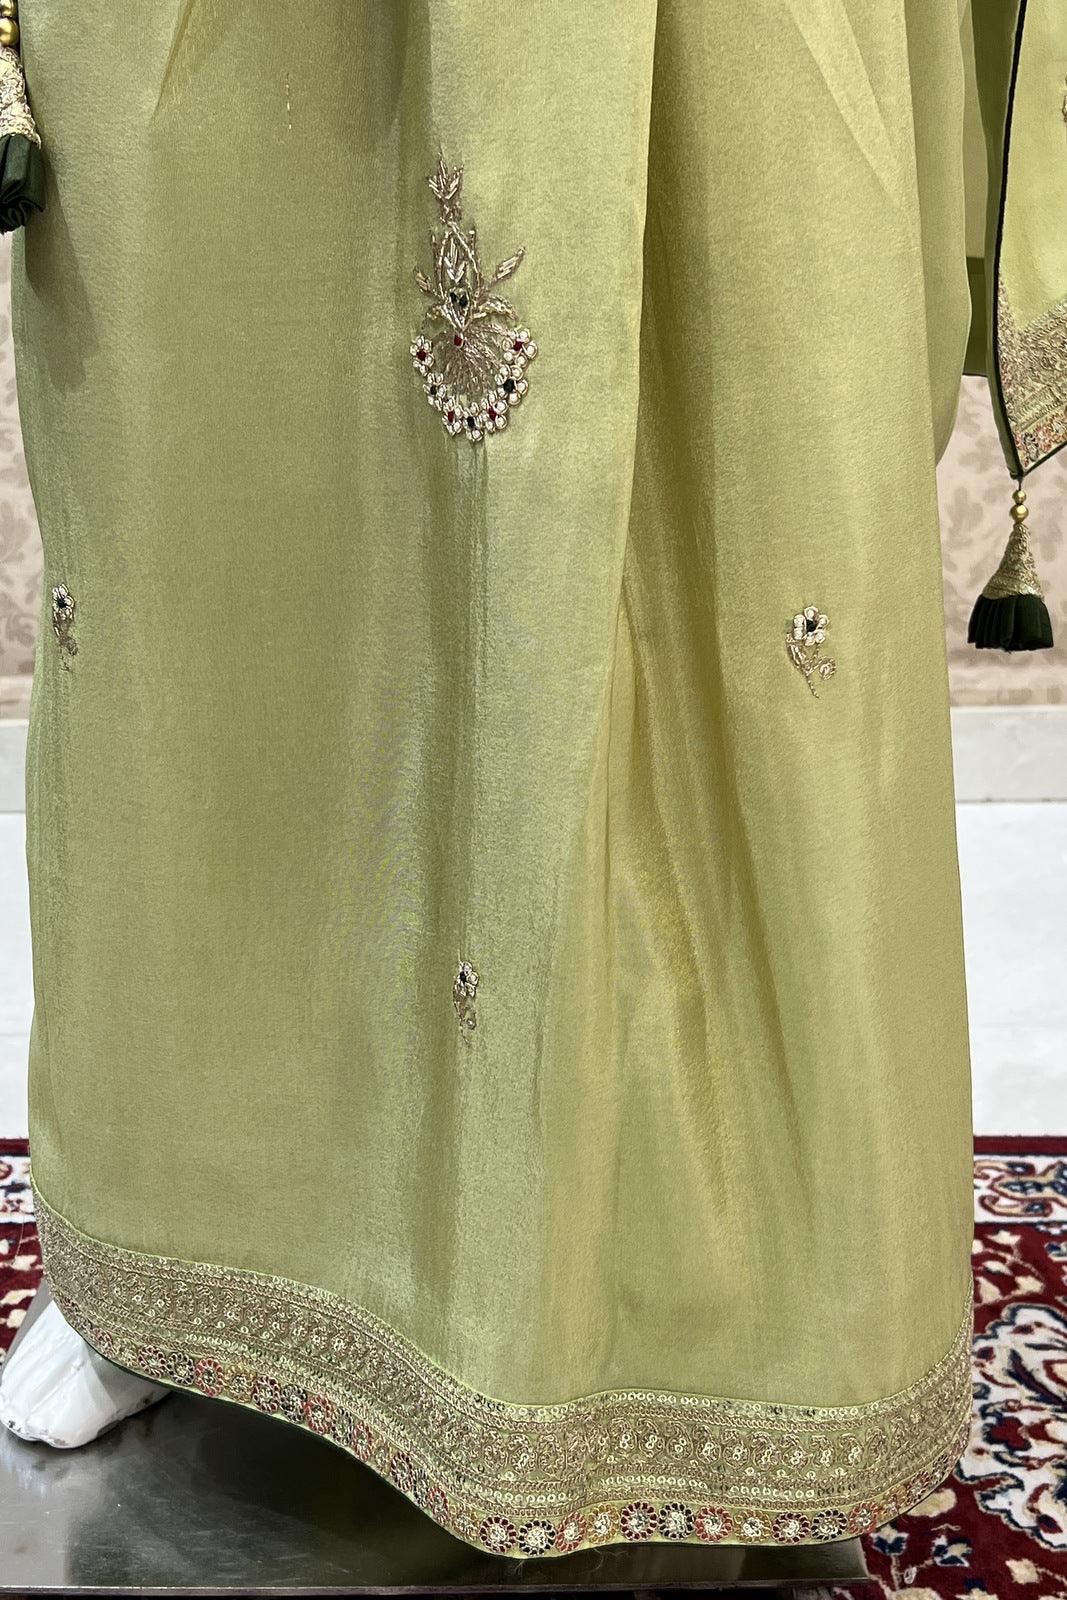 Pista Green Pearl, Sequins and Zari work Saree with Matching Semi Stitched Designer Blouse - Seasons Chennai